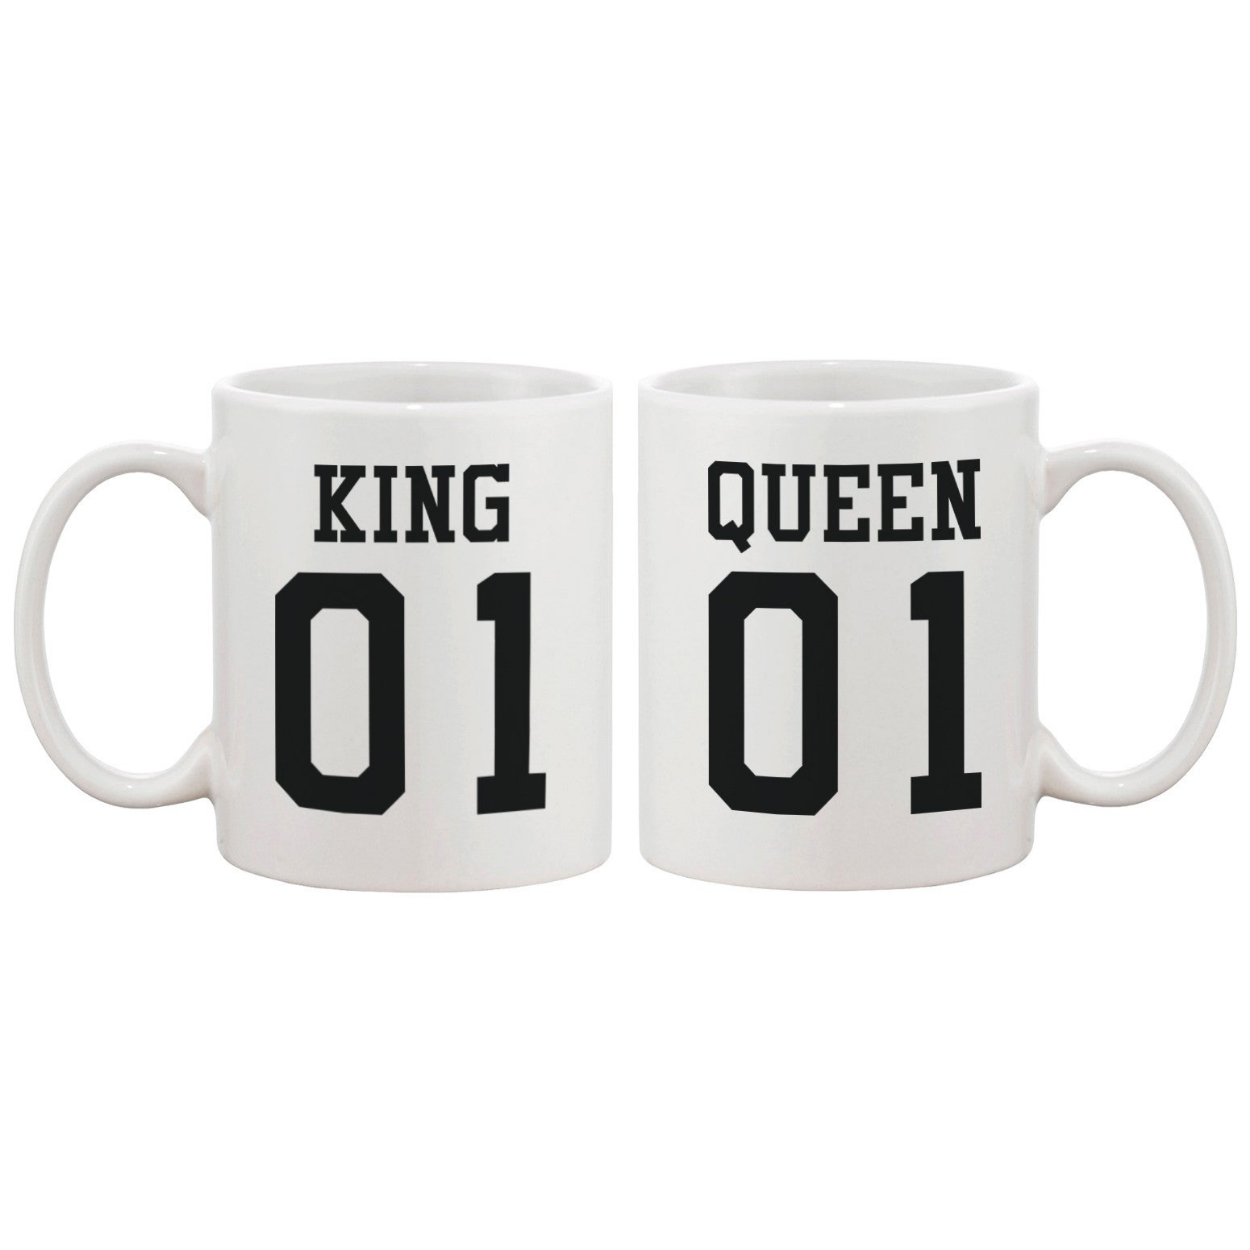 King 01 Queen 01 Couple Mug- Cute Matching Ceramic Cups Gift for Couples White